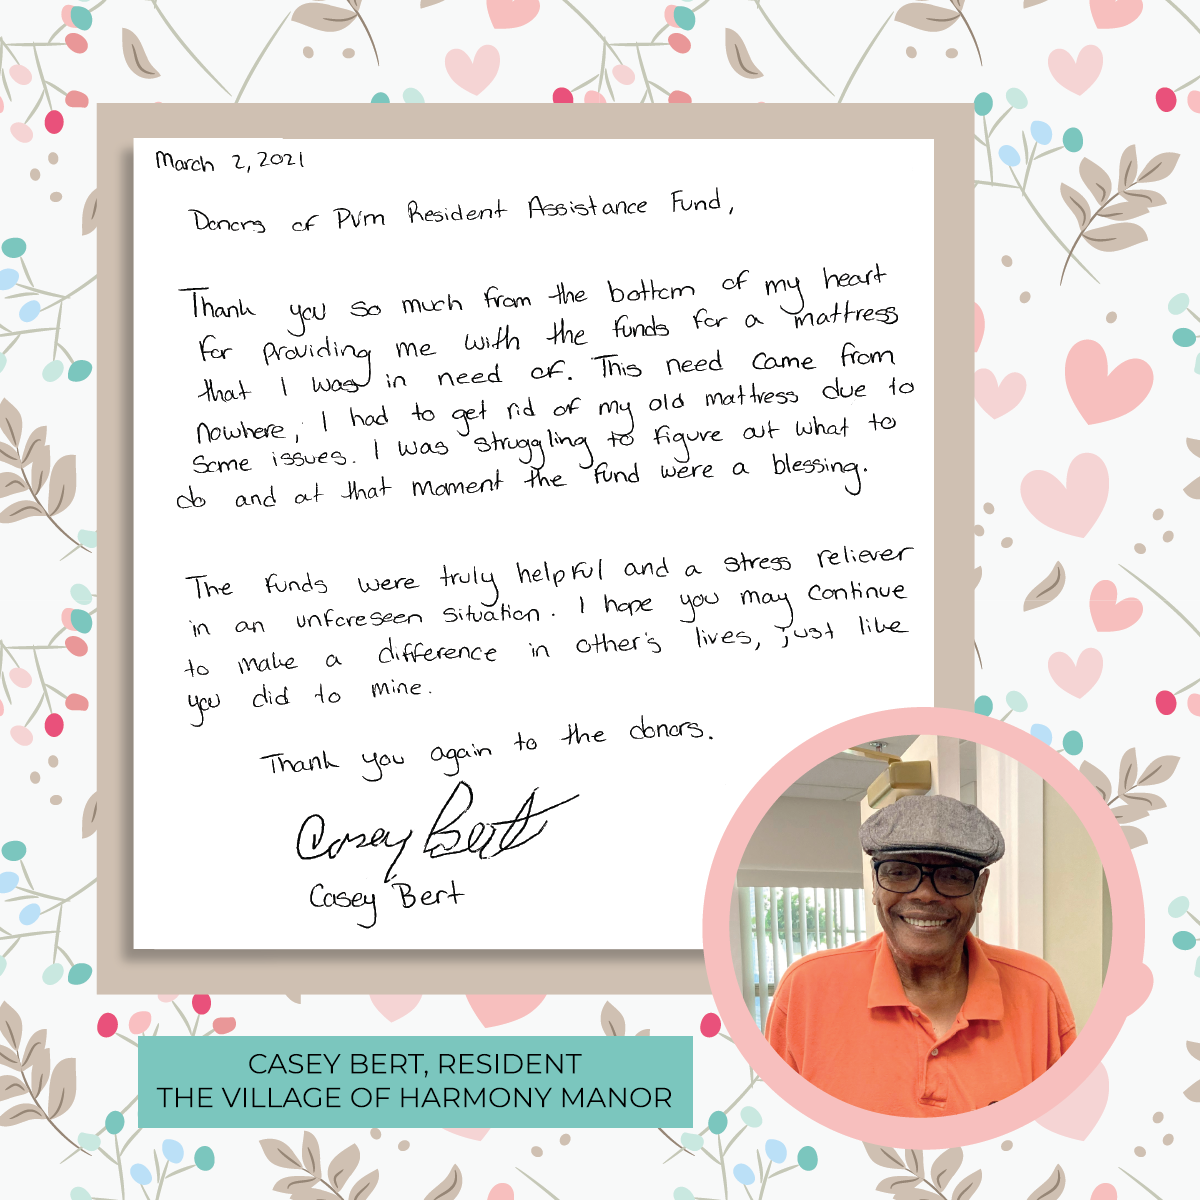 A thank you note from Resident Casey Bert, thanking donors for a new mattress.